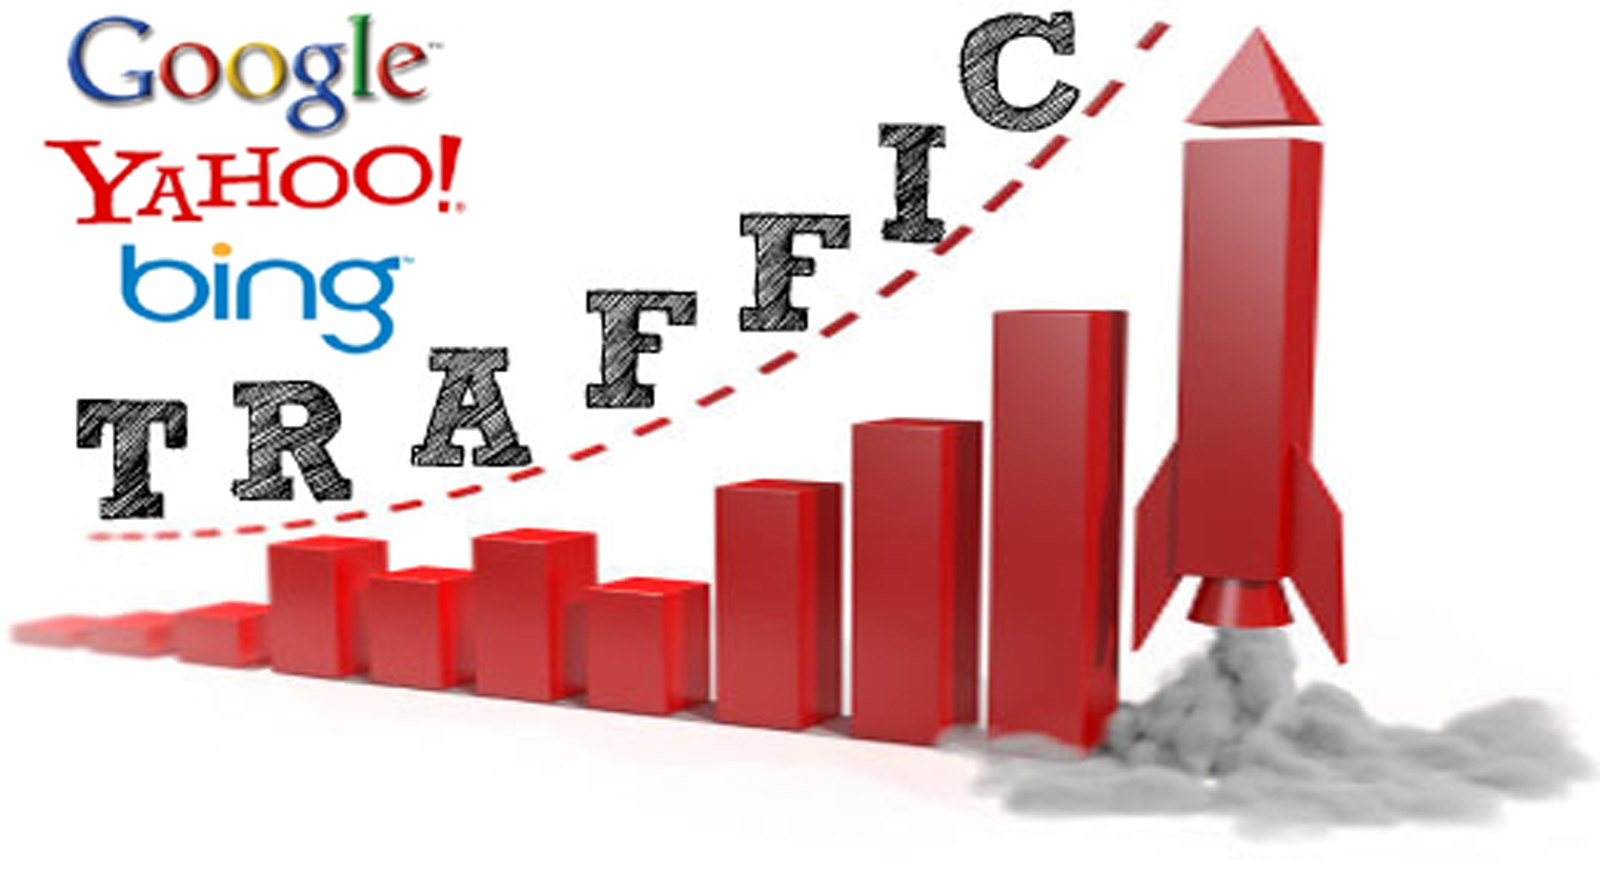 How to get more Website Traffic